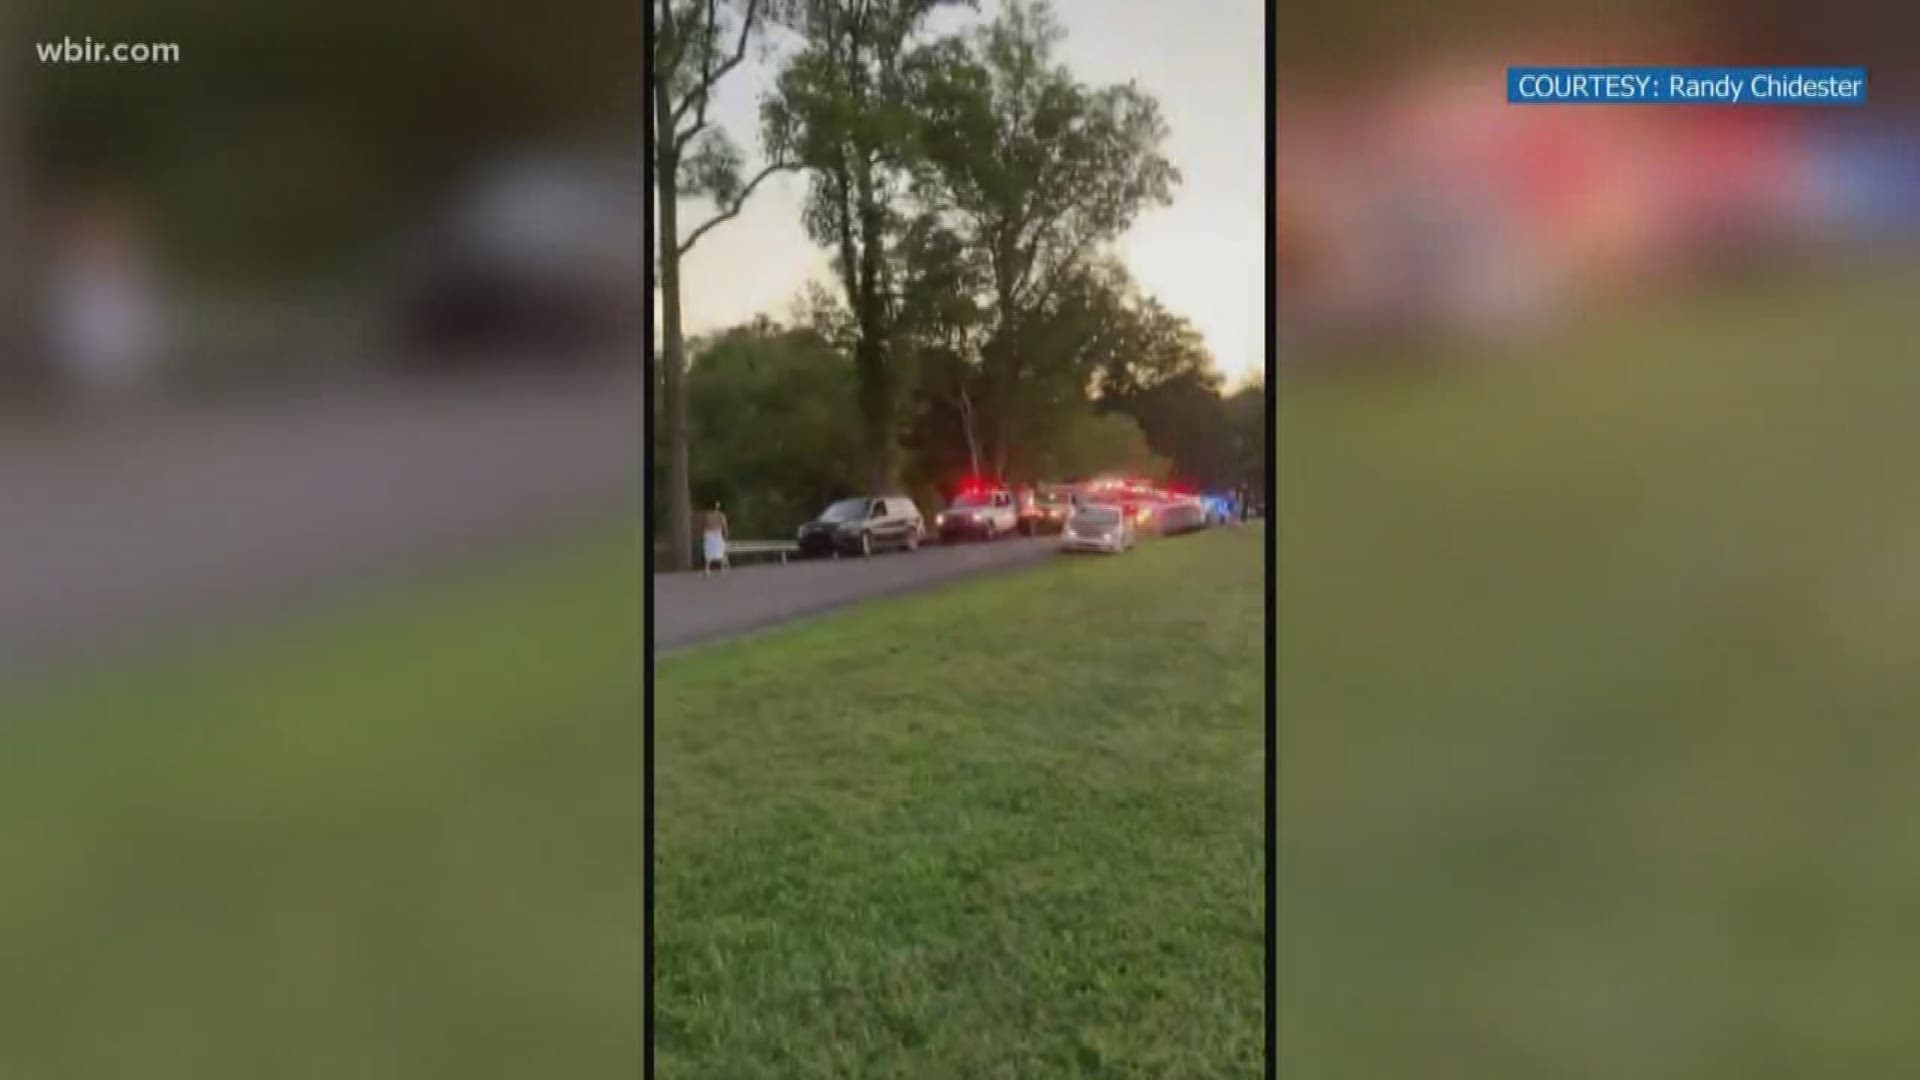 A spokesperson for Sevierville Police said they received calls from witnesses just before 8 p.m. saying a man jumped into the river and had yet to resurface.